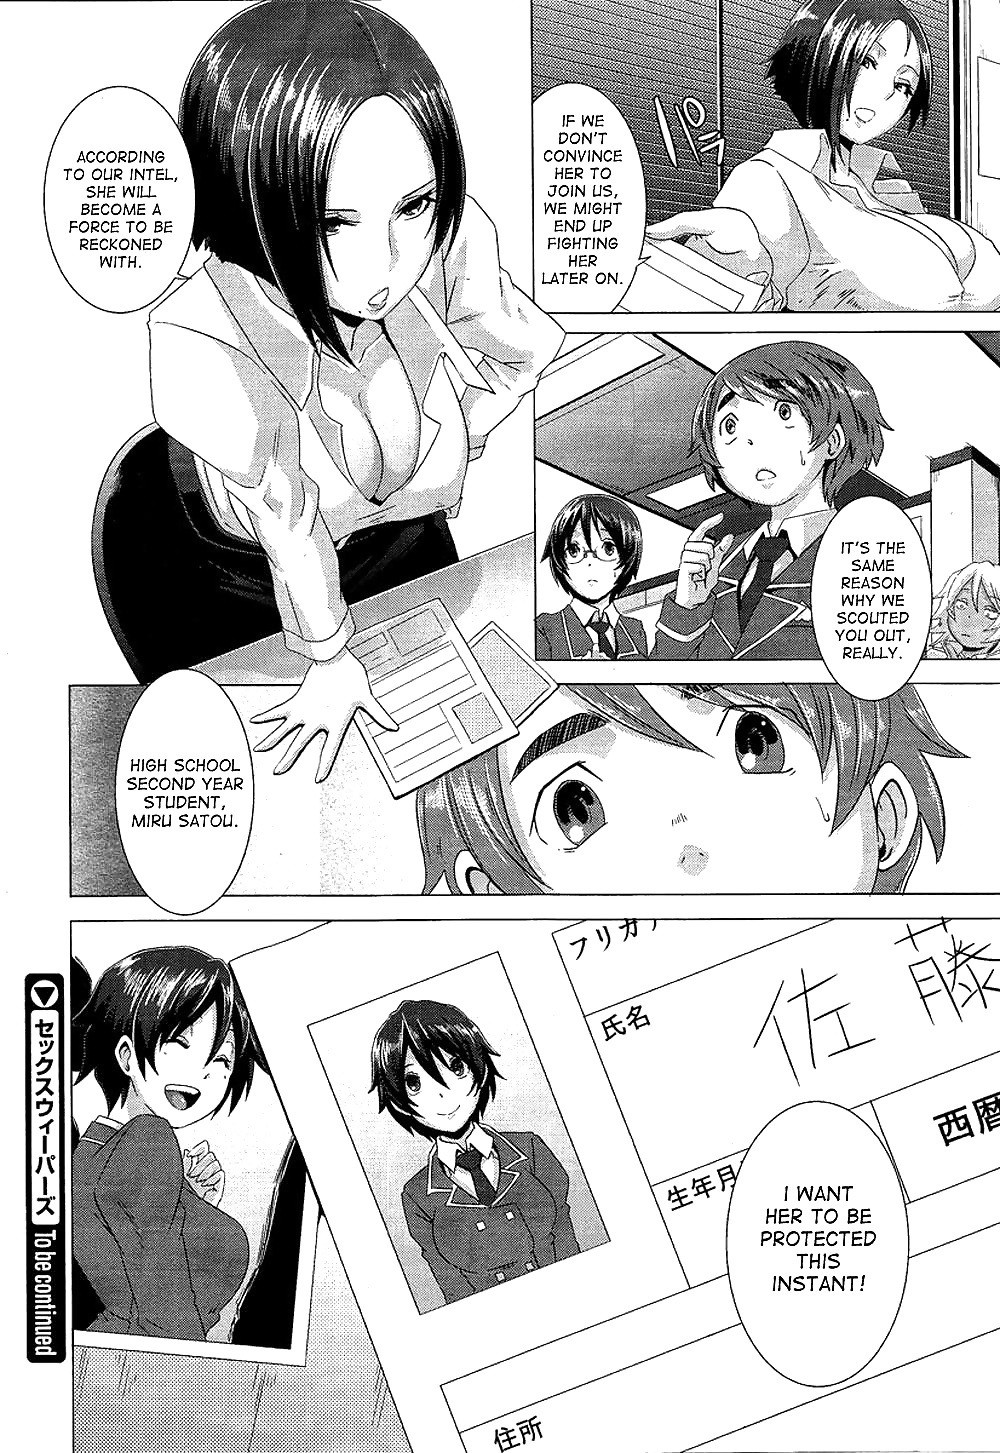 The Sex Sweepers Chapter 1-10 Hentai Manga Compilation